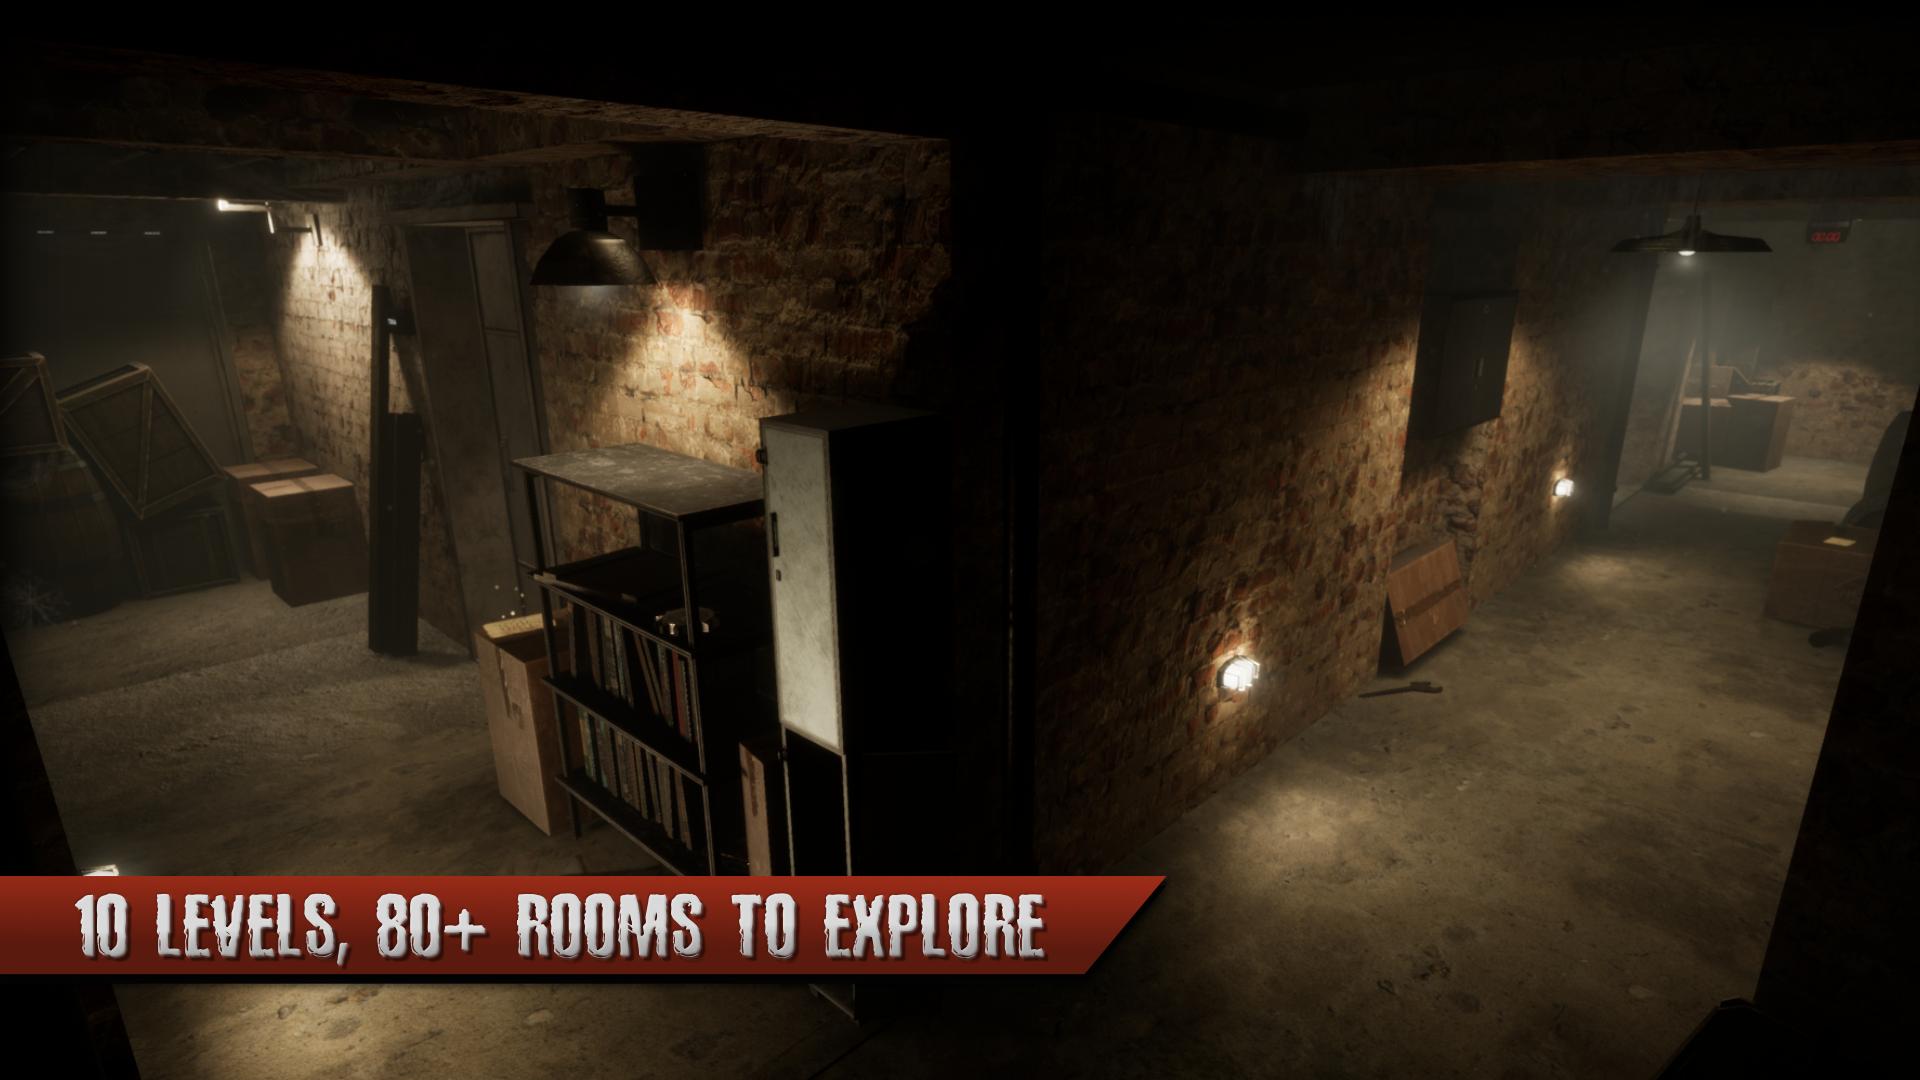 Escape Legacy Vr Free Virtual Reality Game For Android Apk Download - exit vr mode roblox